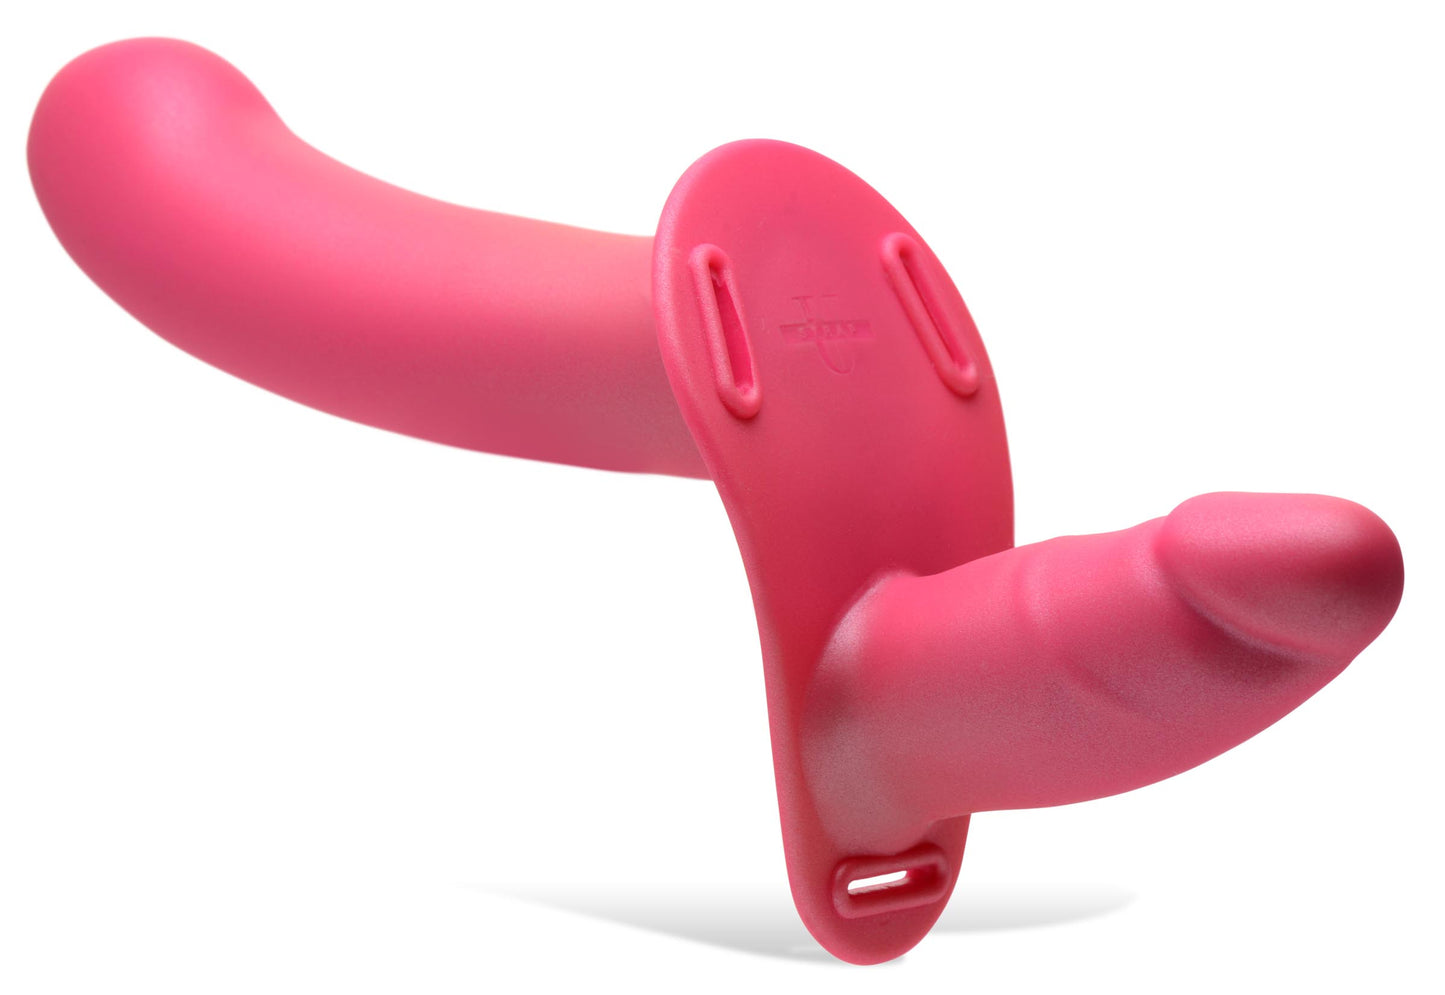 28X Double Diva 1.5 Inch Double Dildo with Harness and Remote Control - Pink - UABDSM